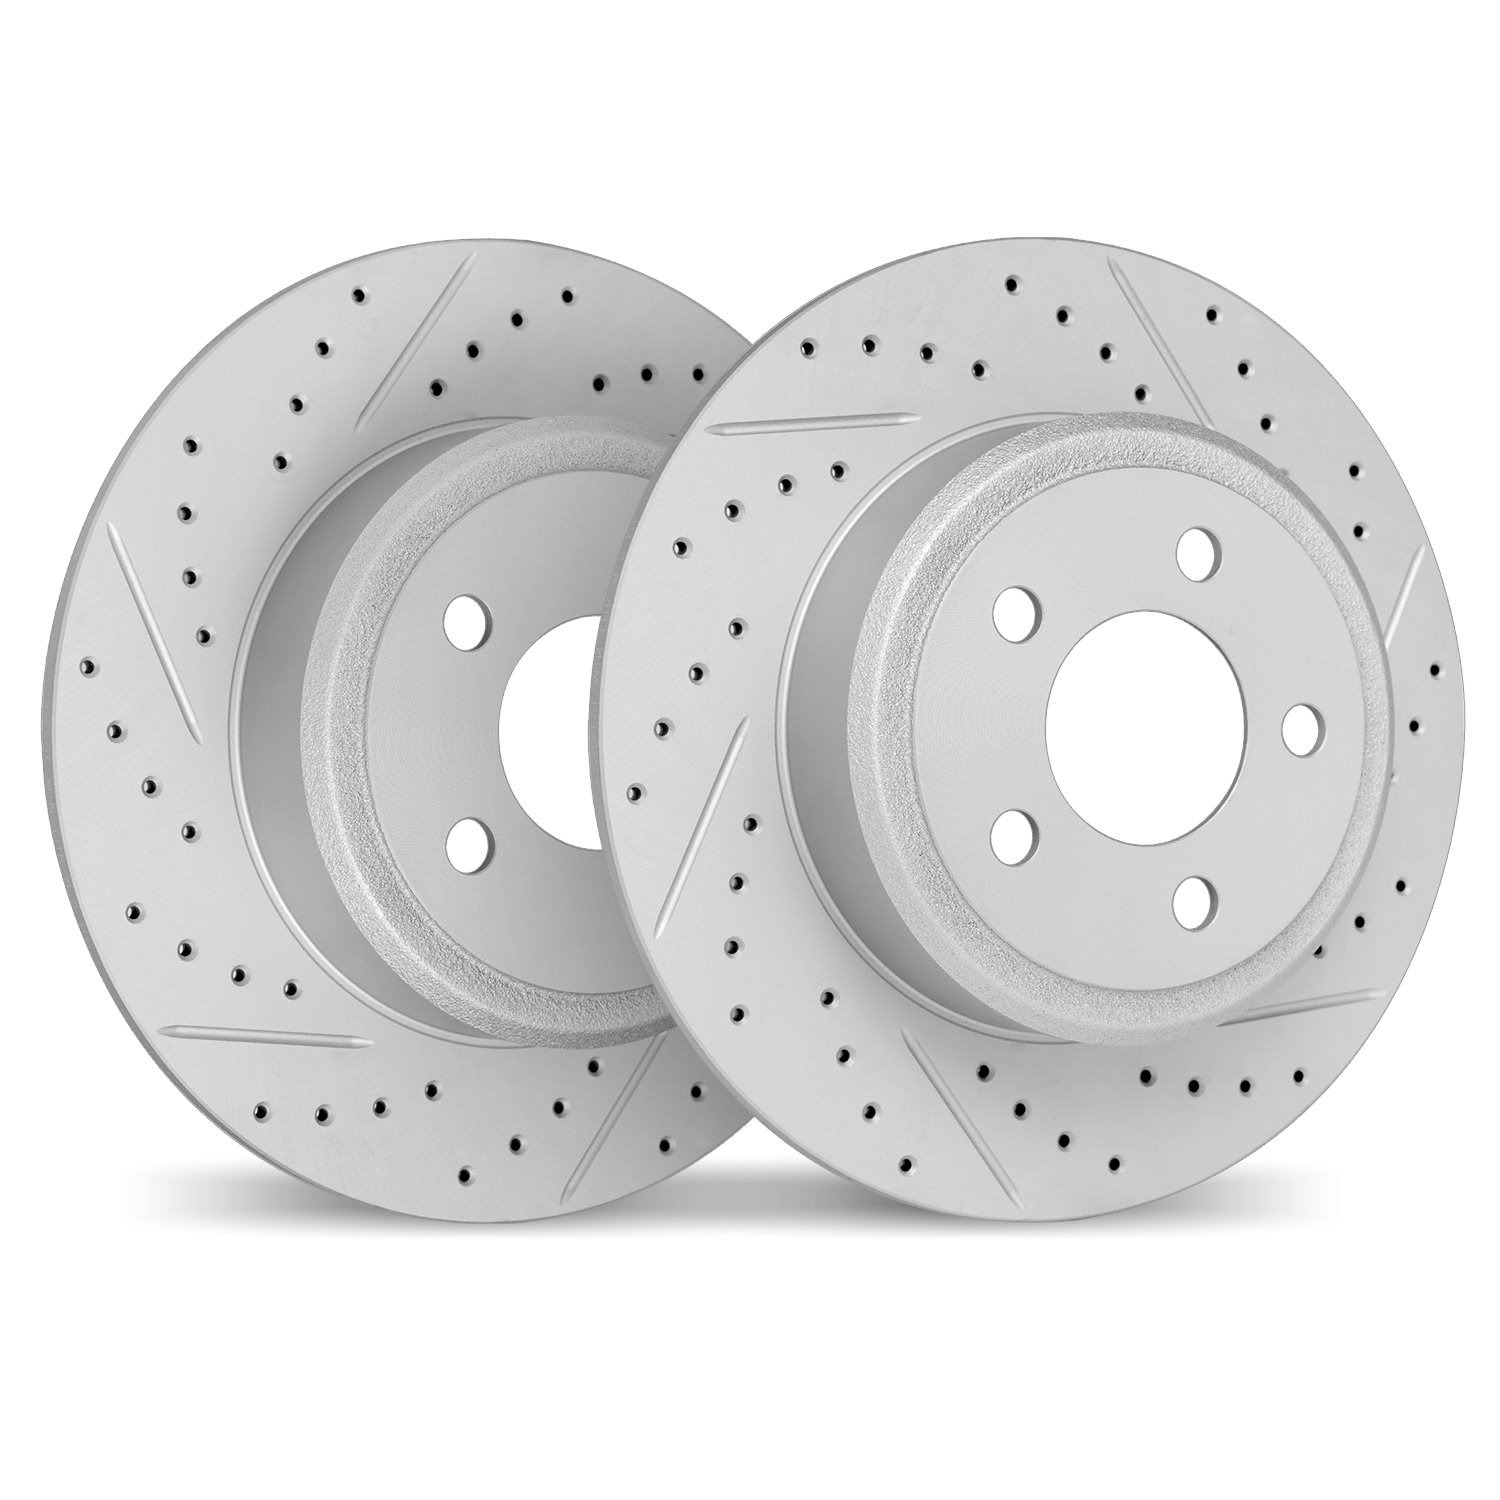 2002-76042 Geoperformance Drilled/Slotted Brake Rotors, 2002-2008 Lexus/Toyota/Scion, Position: Rear